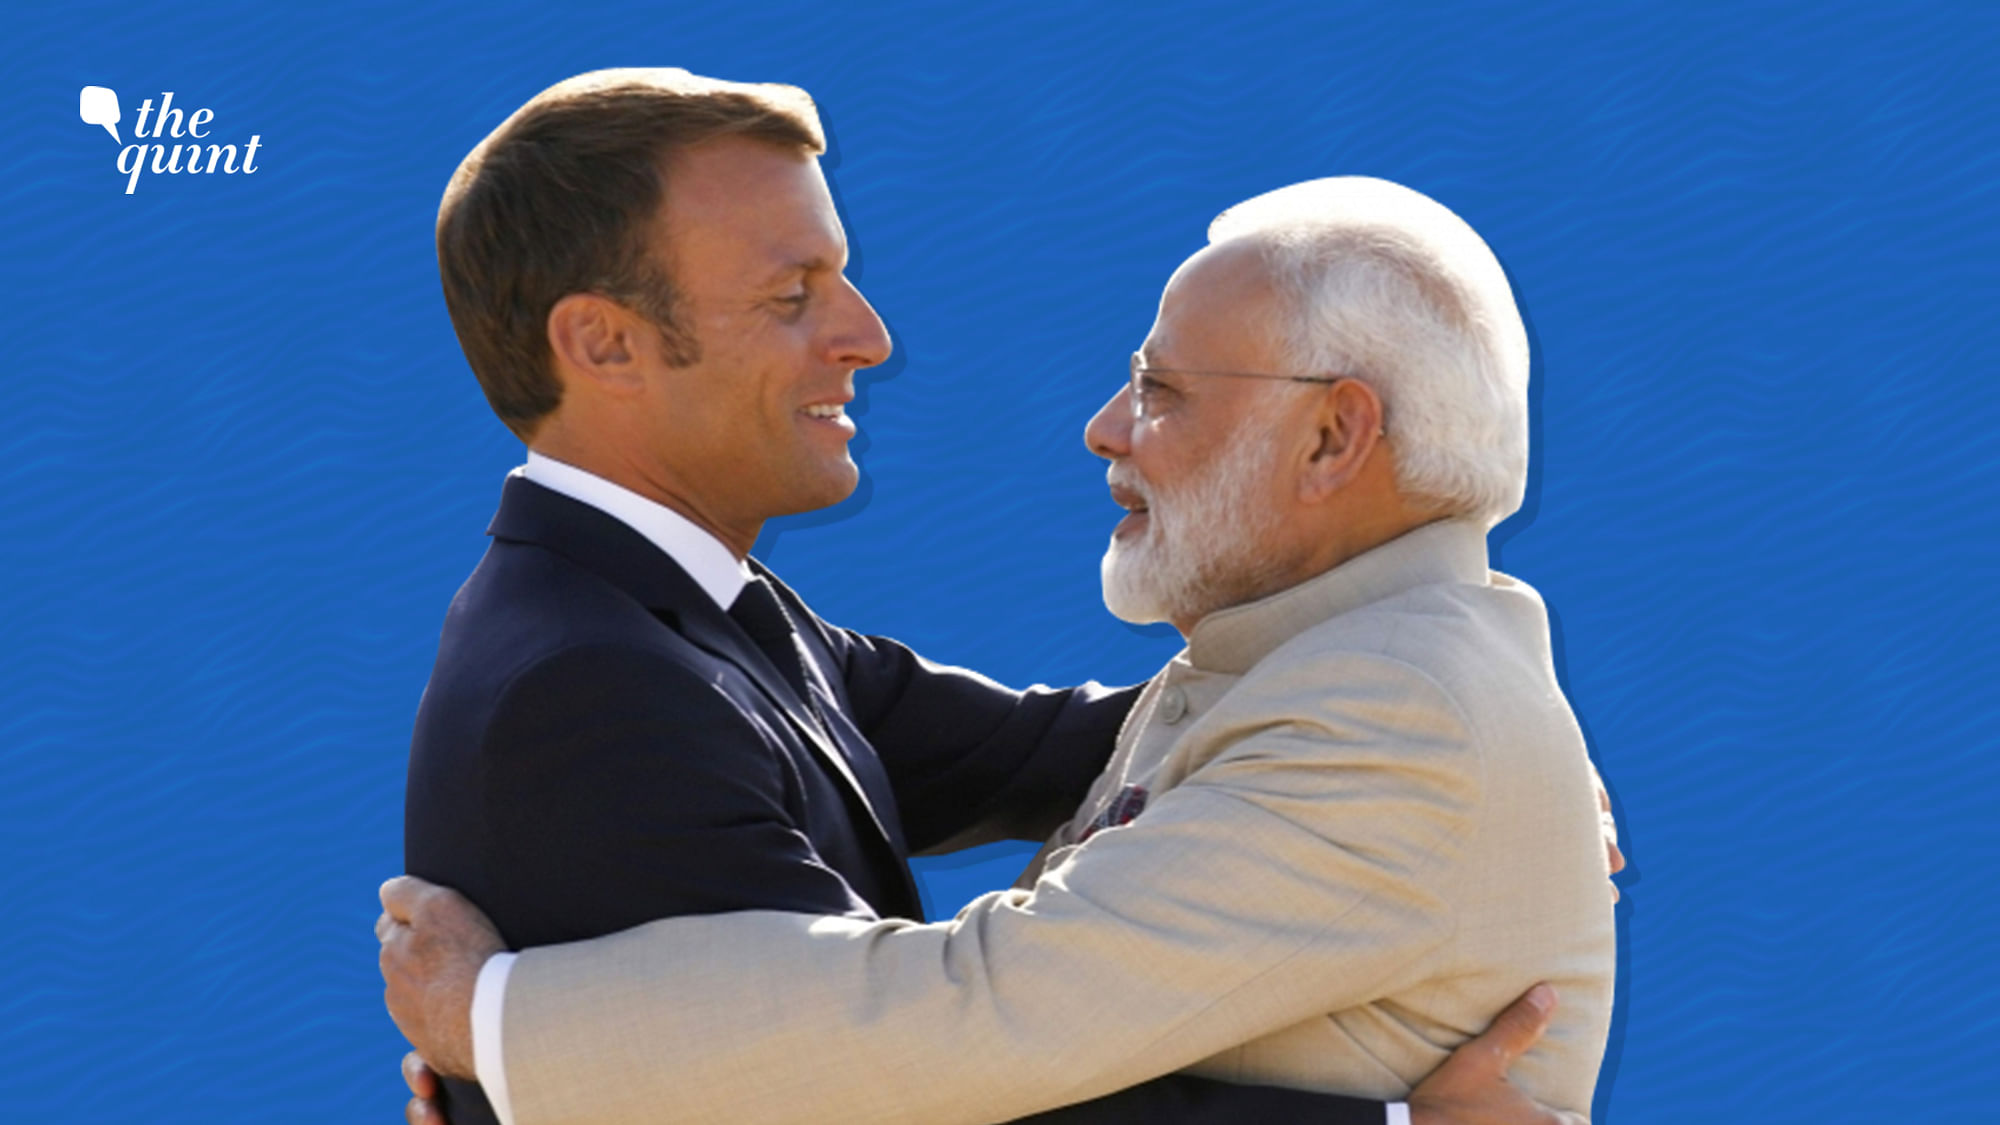 Indo-French bilateral ties have strengthened over the years as more investments and companies come in.